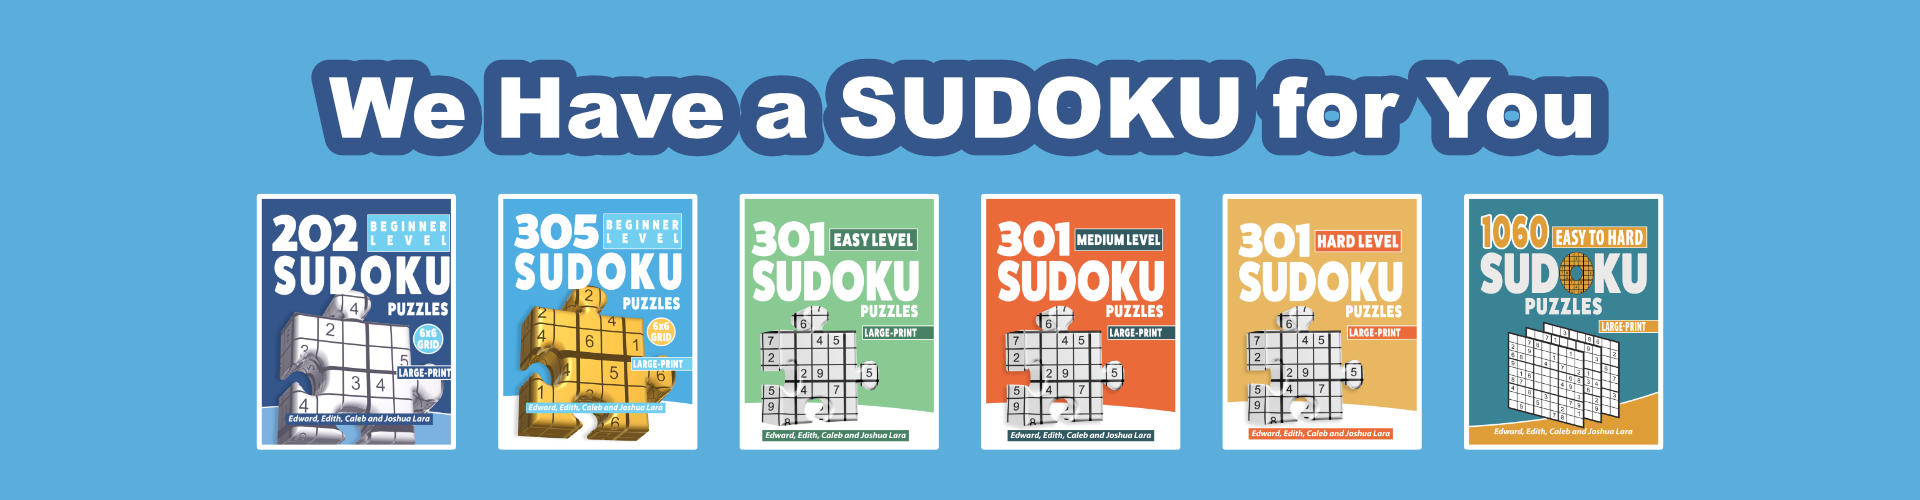 Sudoku Puzzles for the Whole Family